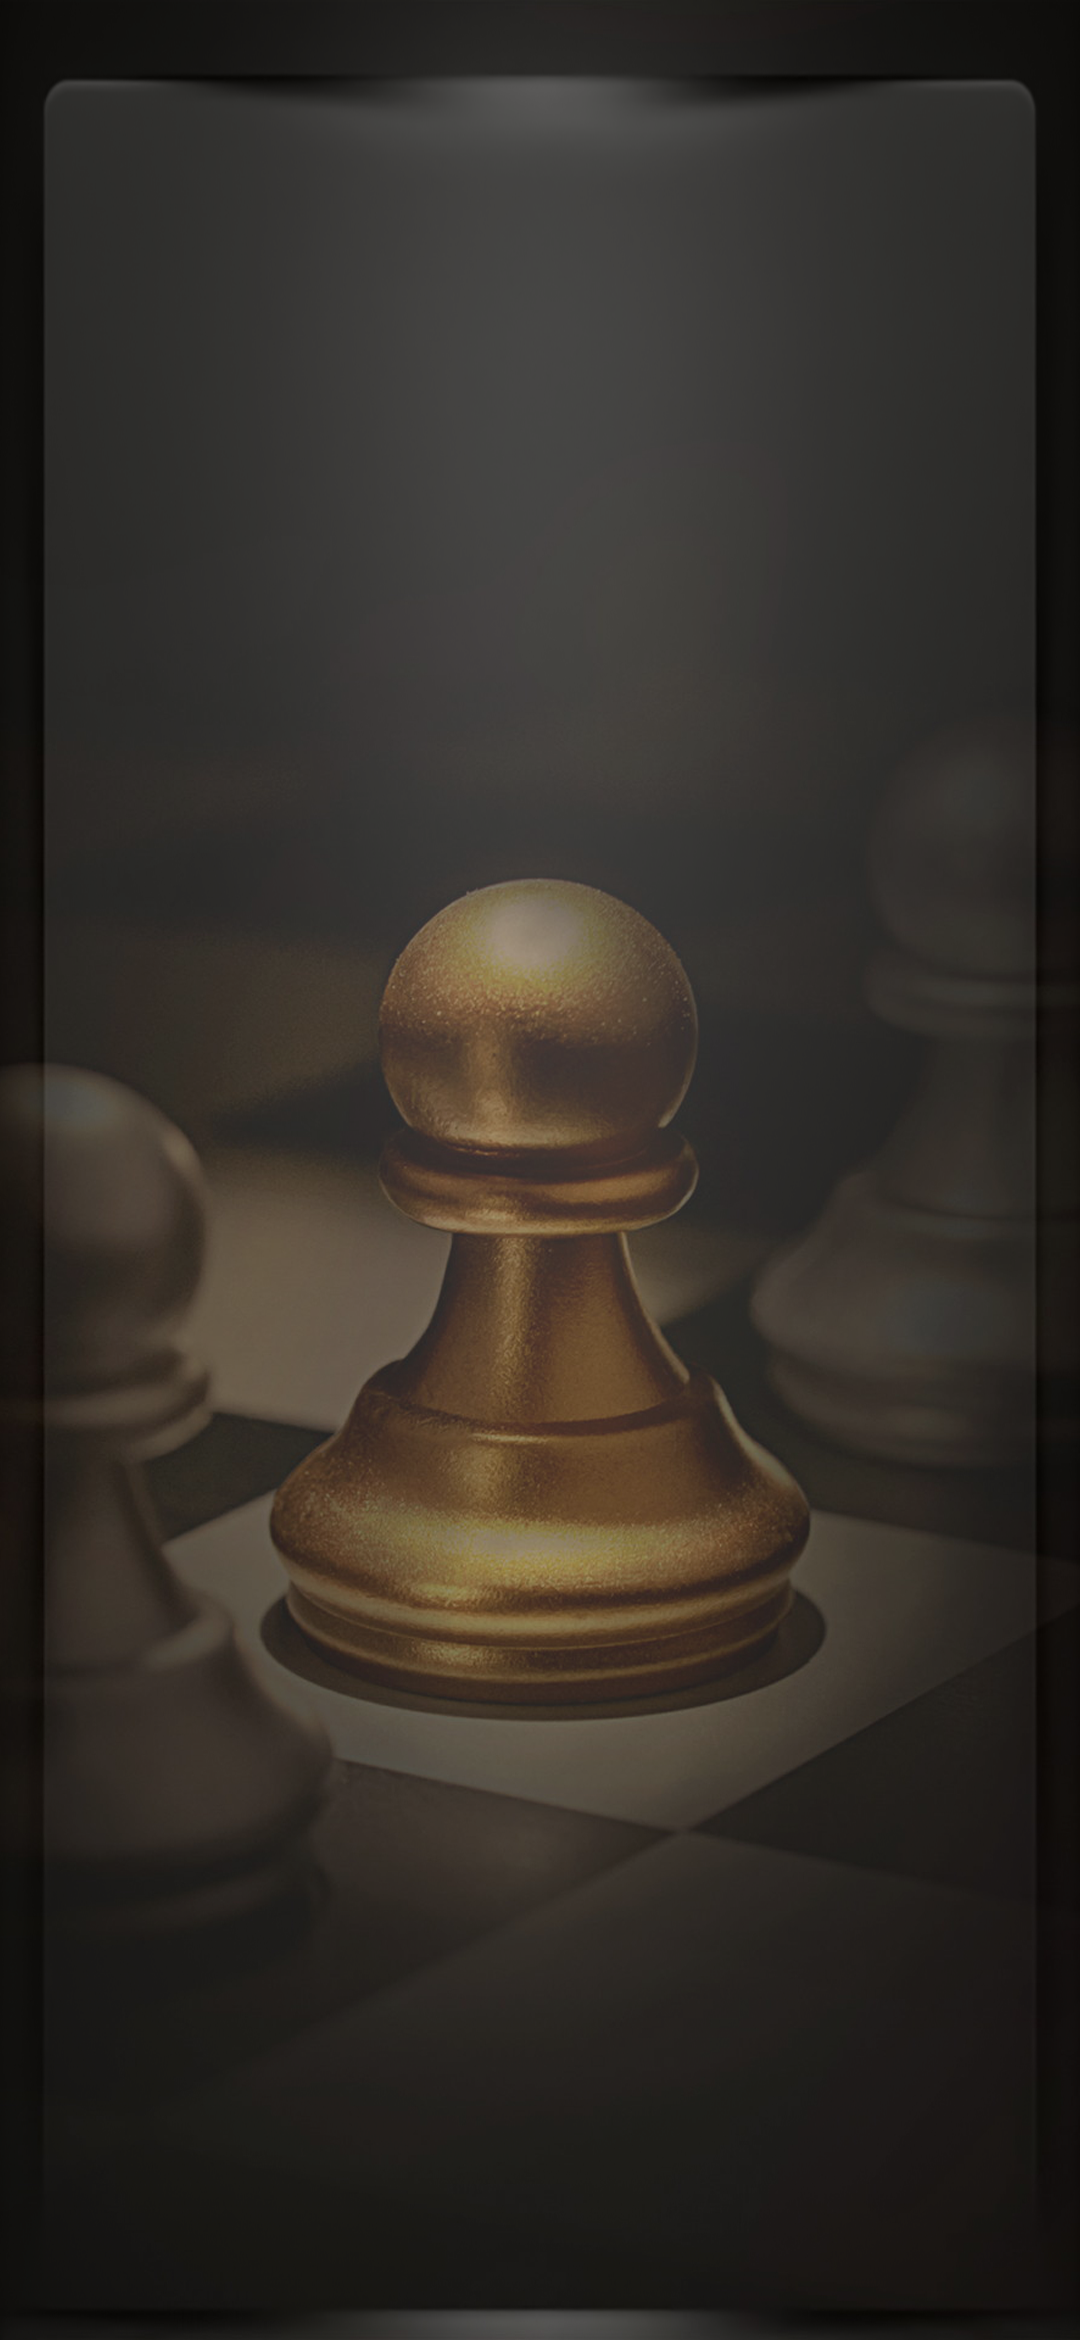 Chess Mobile Wallpapers, HD Chess Backgrounds, Free Images Download